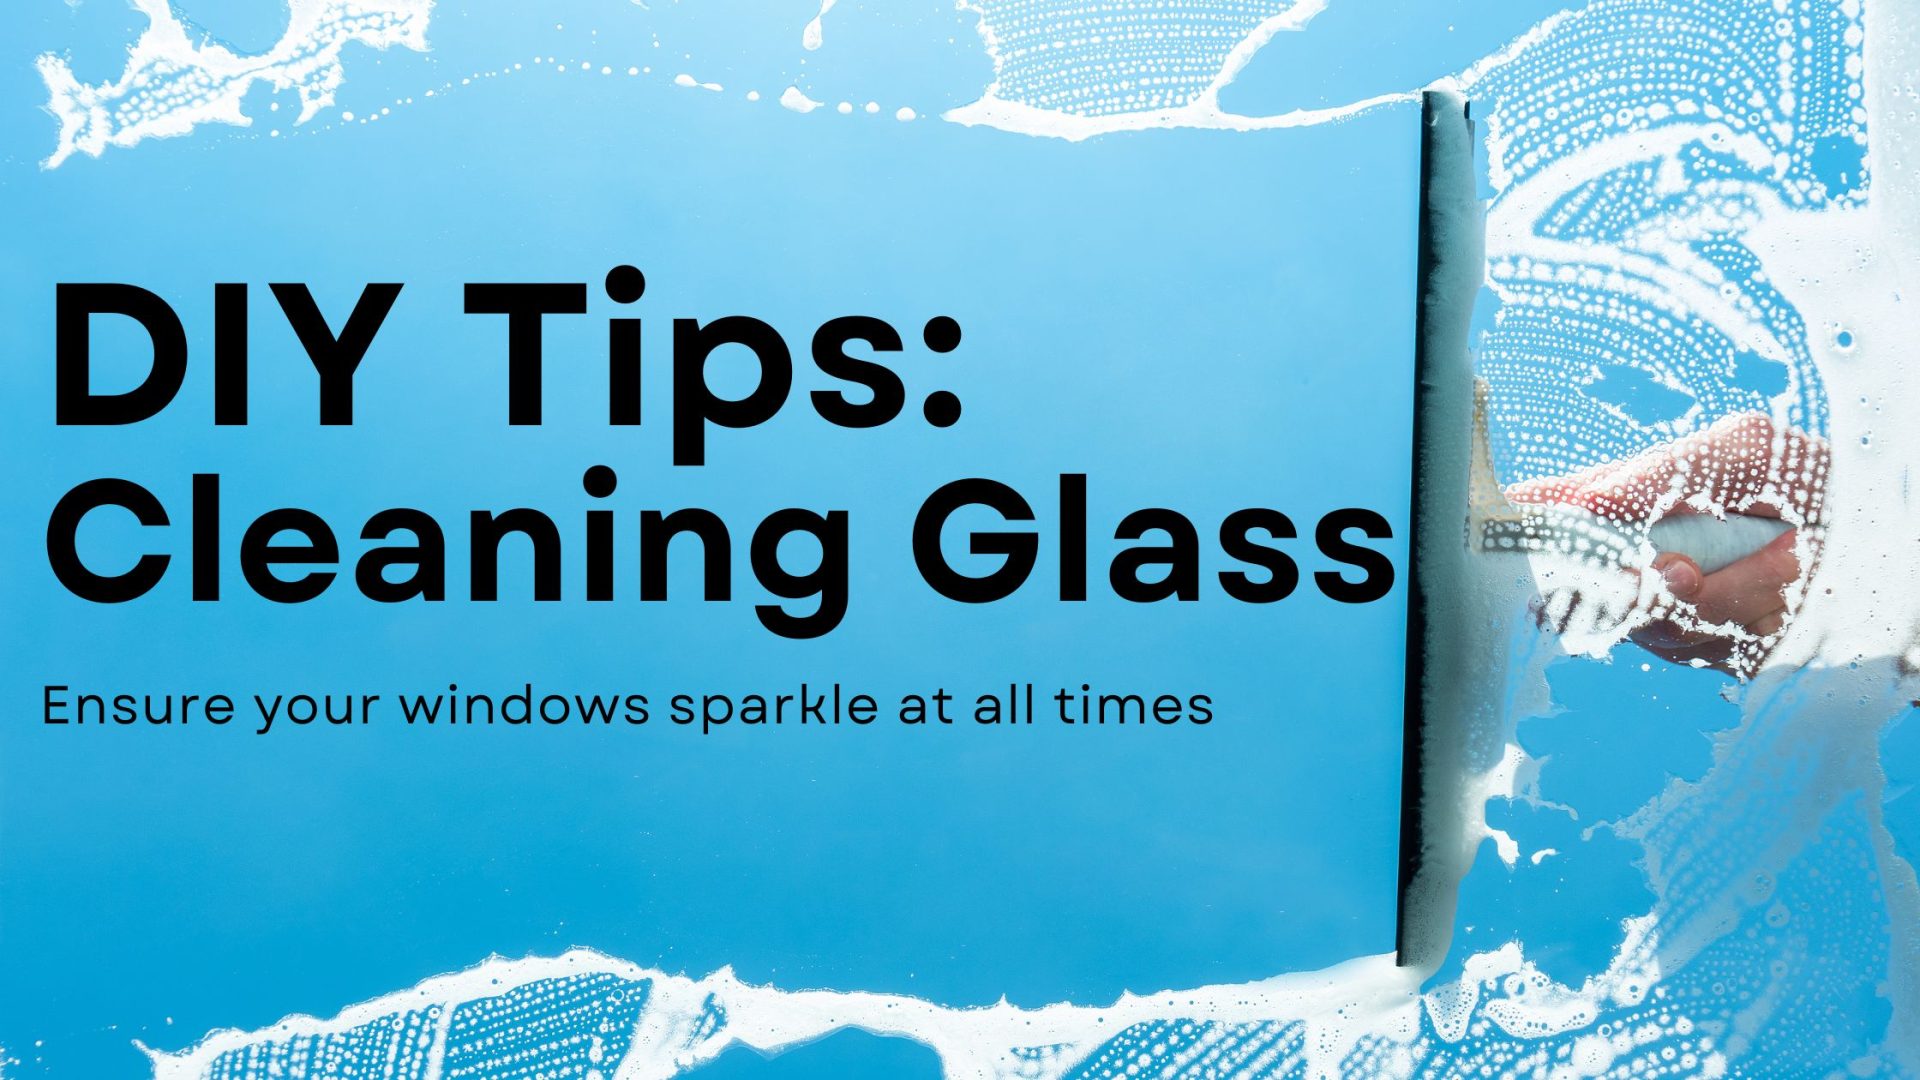 DIY glass cleaning tips